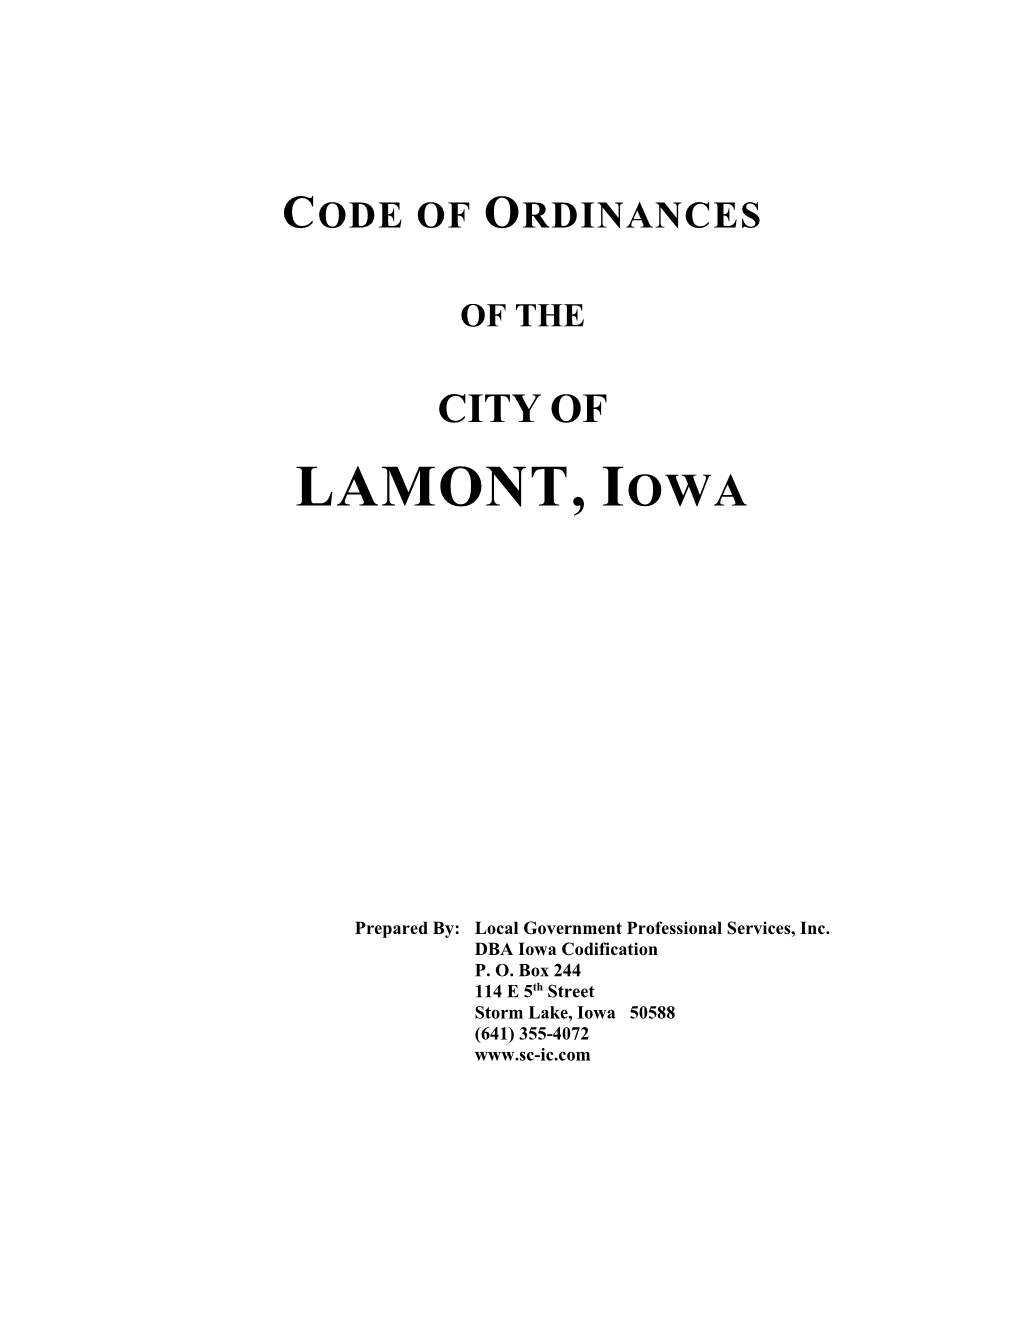 Chapter 1 - Code of Ordinances